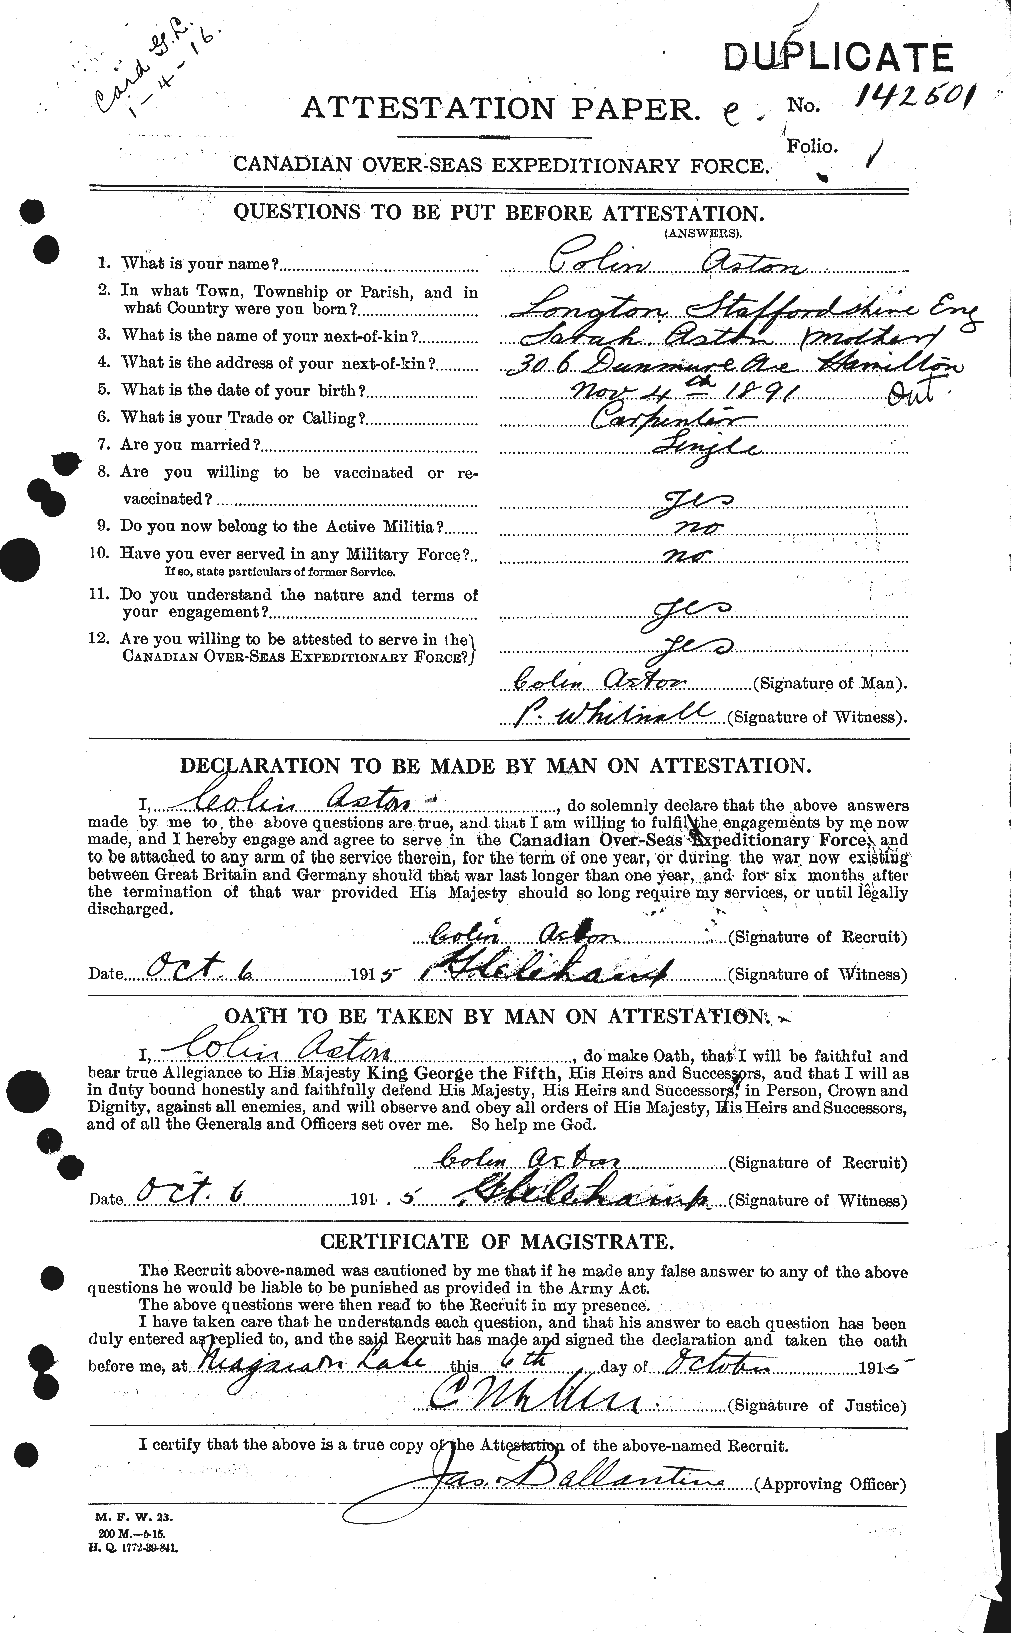 Personnel Records of the First World War - CEF 217106a